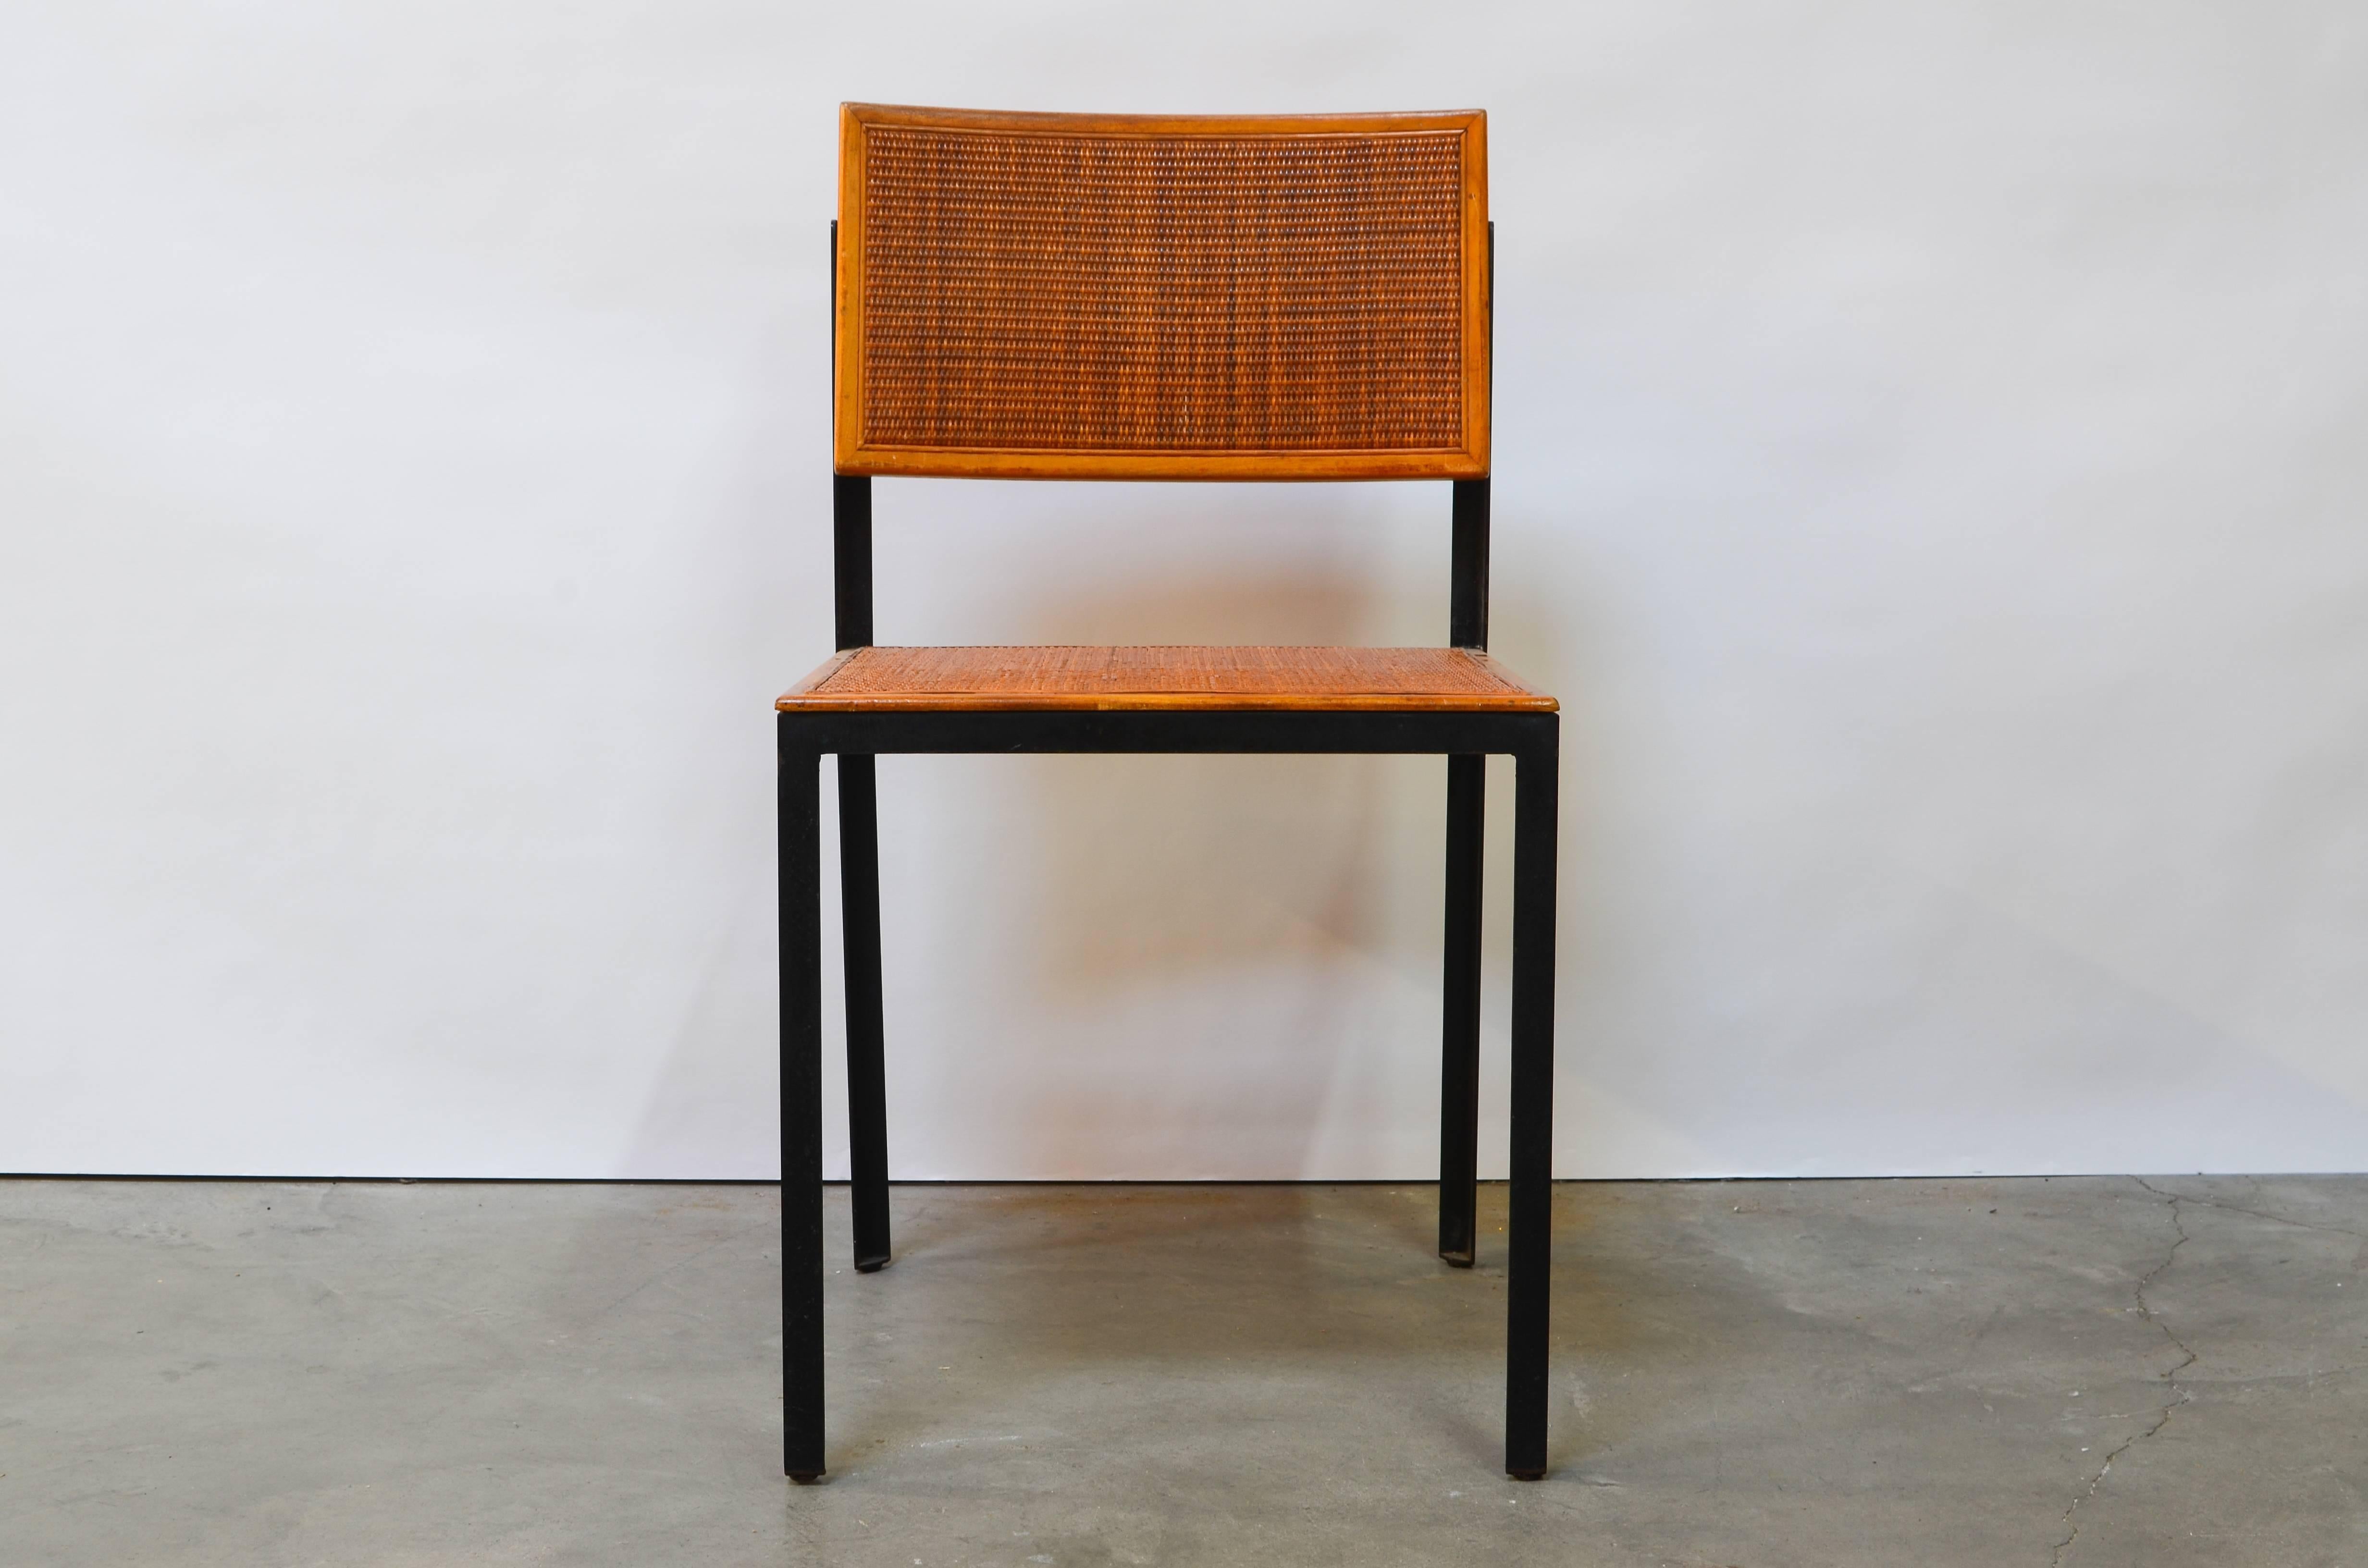 Rare steel frame side chair with rattan seat designed by George Nelson for Herman Miller, circa 1950s.